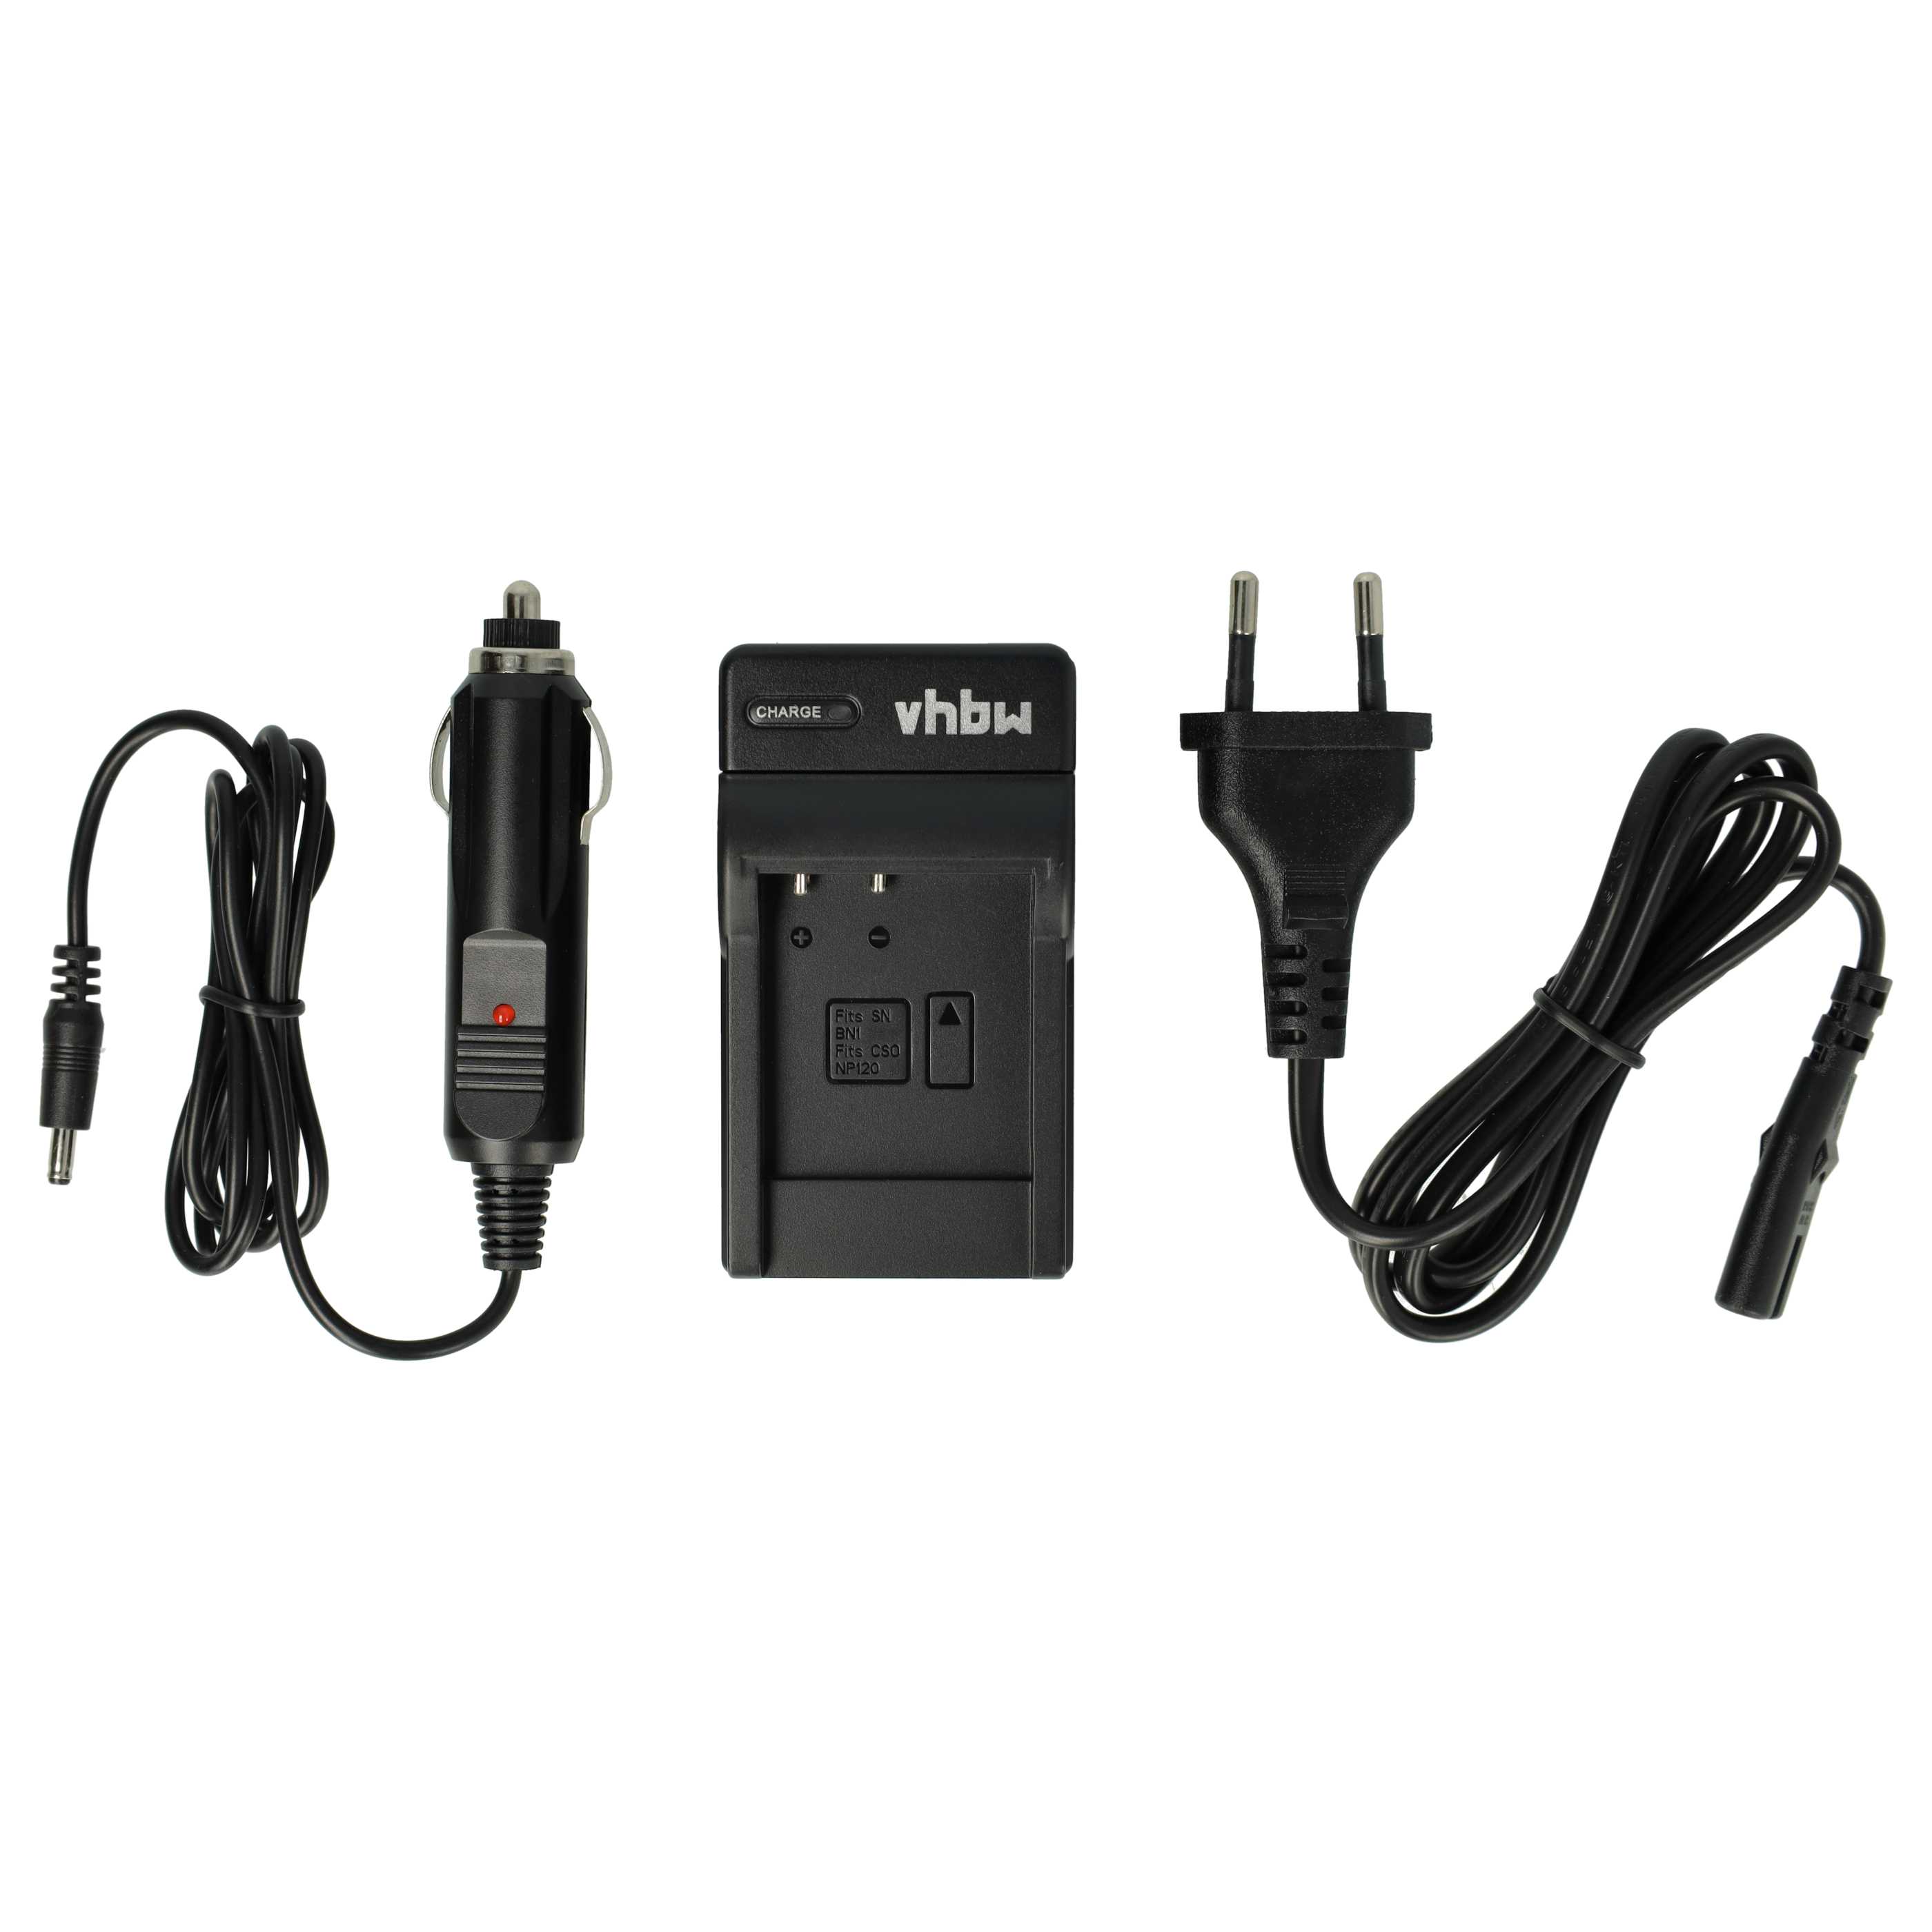 Battery Charger suitable for Sony NP-BN1 Camera etc. - 0.6 A, 4.2 V